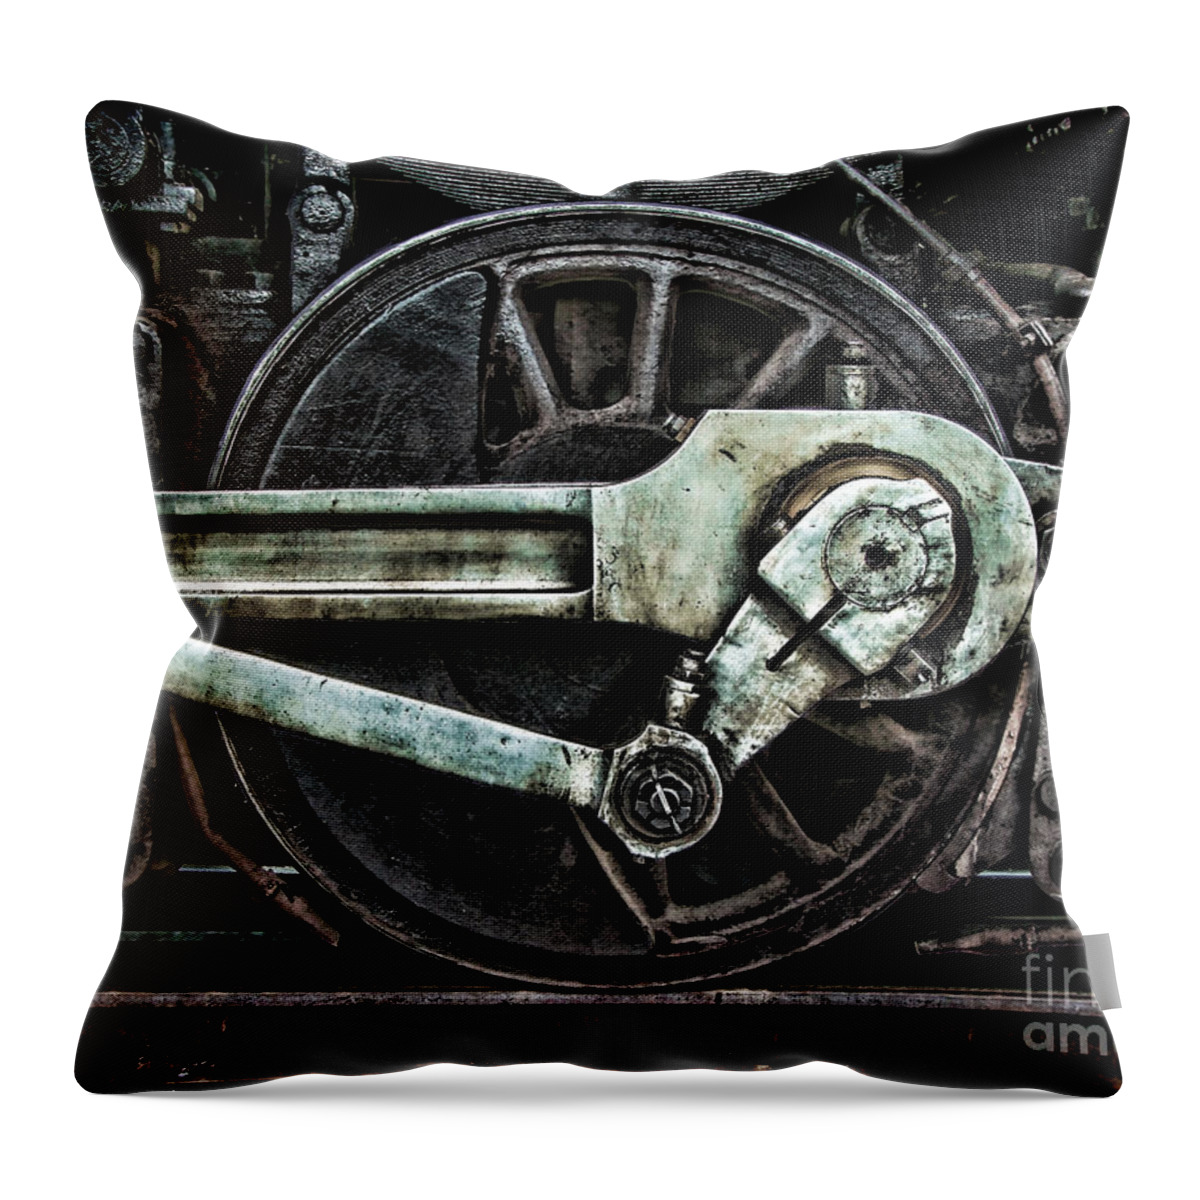 Locomotive Throw Pillow featuring the photograph Steam Power by Olivier Le Queinec